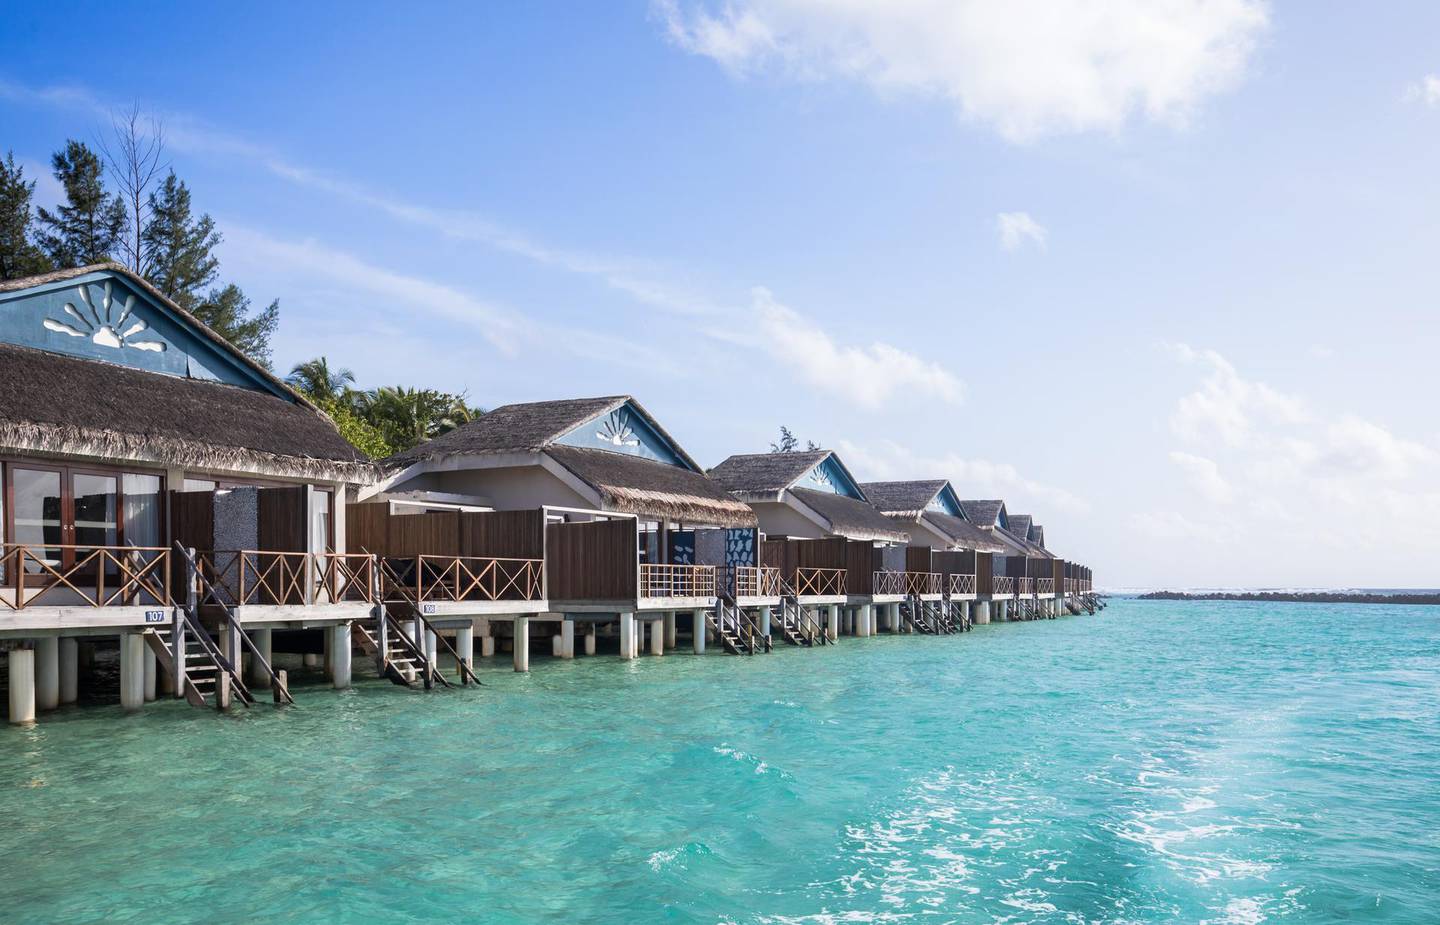 Taj Coral Reef Resort and Spa has reoepend to travellers in the Maldives. Courtesy Taj Hotels